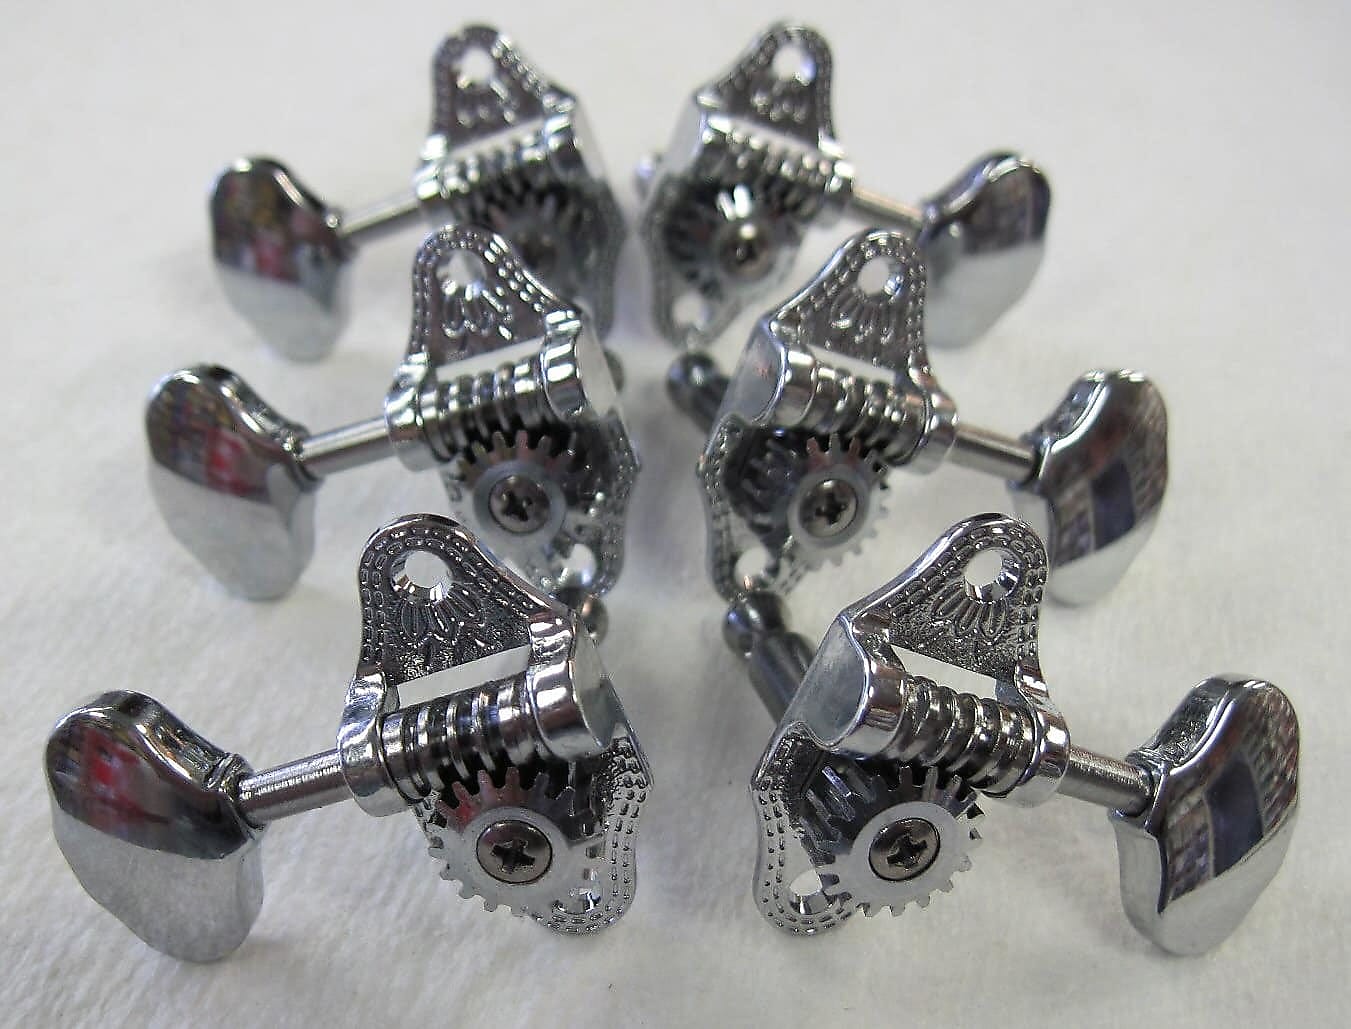 Gretsch Tuners Open Back Electromatic G5400-Hollow Bodies Chrome